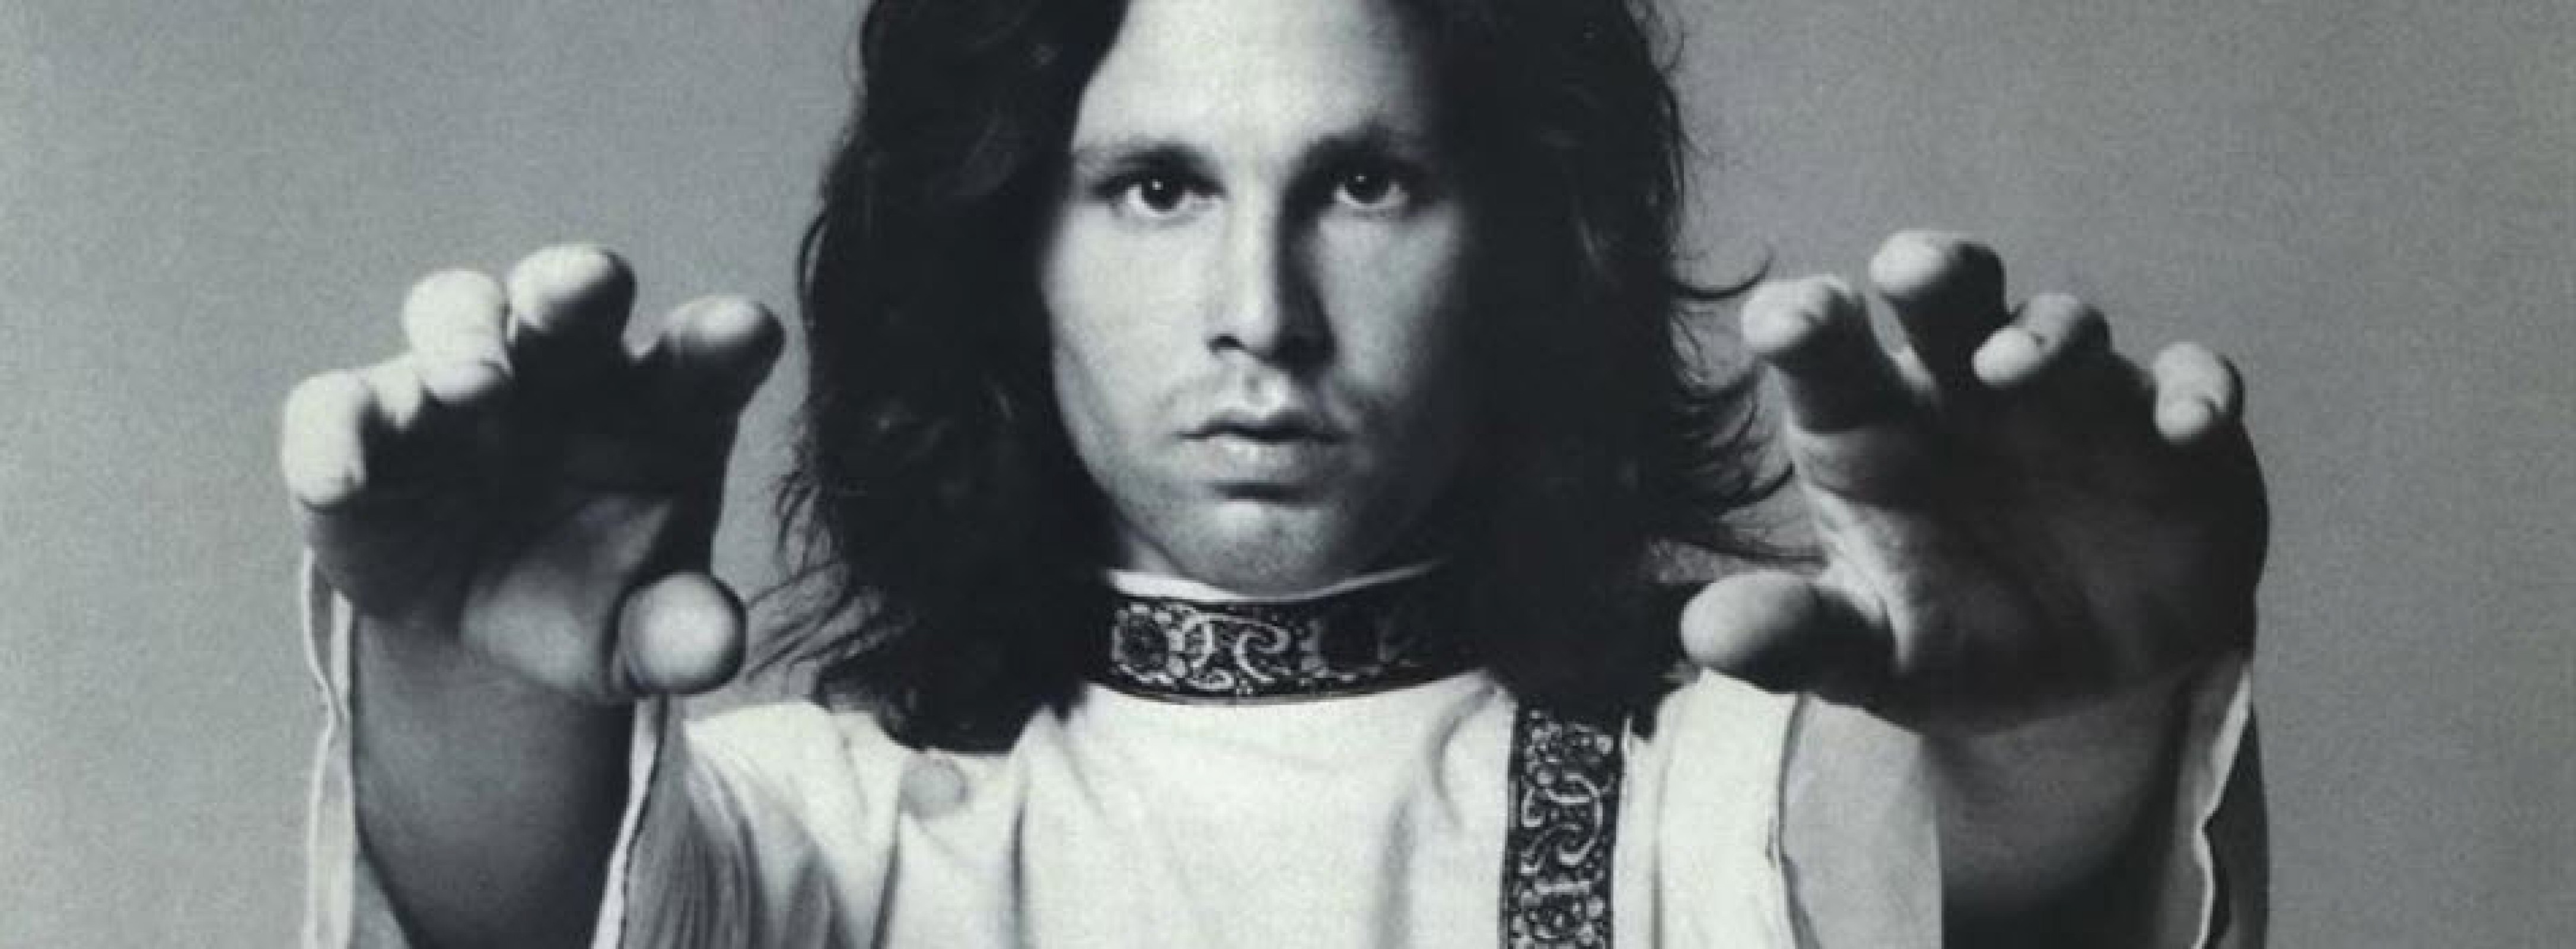 Jim Morrison Is Dead and Living in Hollywood Esquire MARCH 1991.